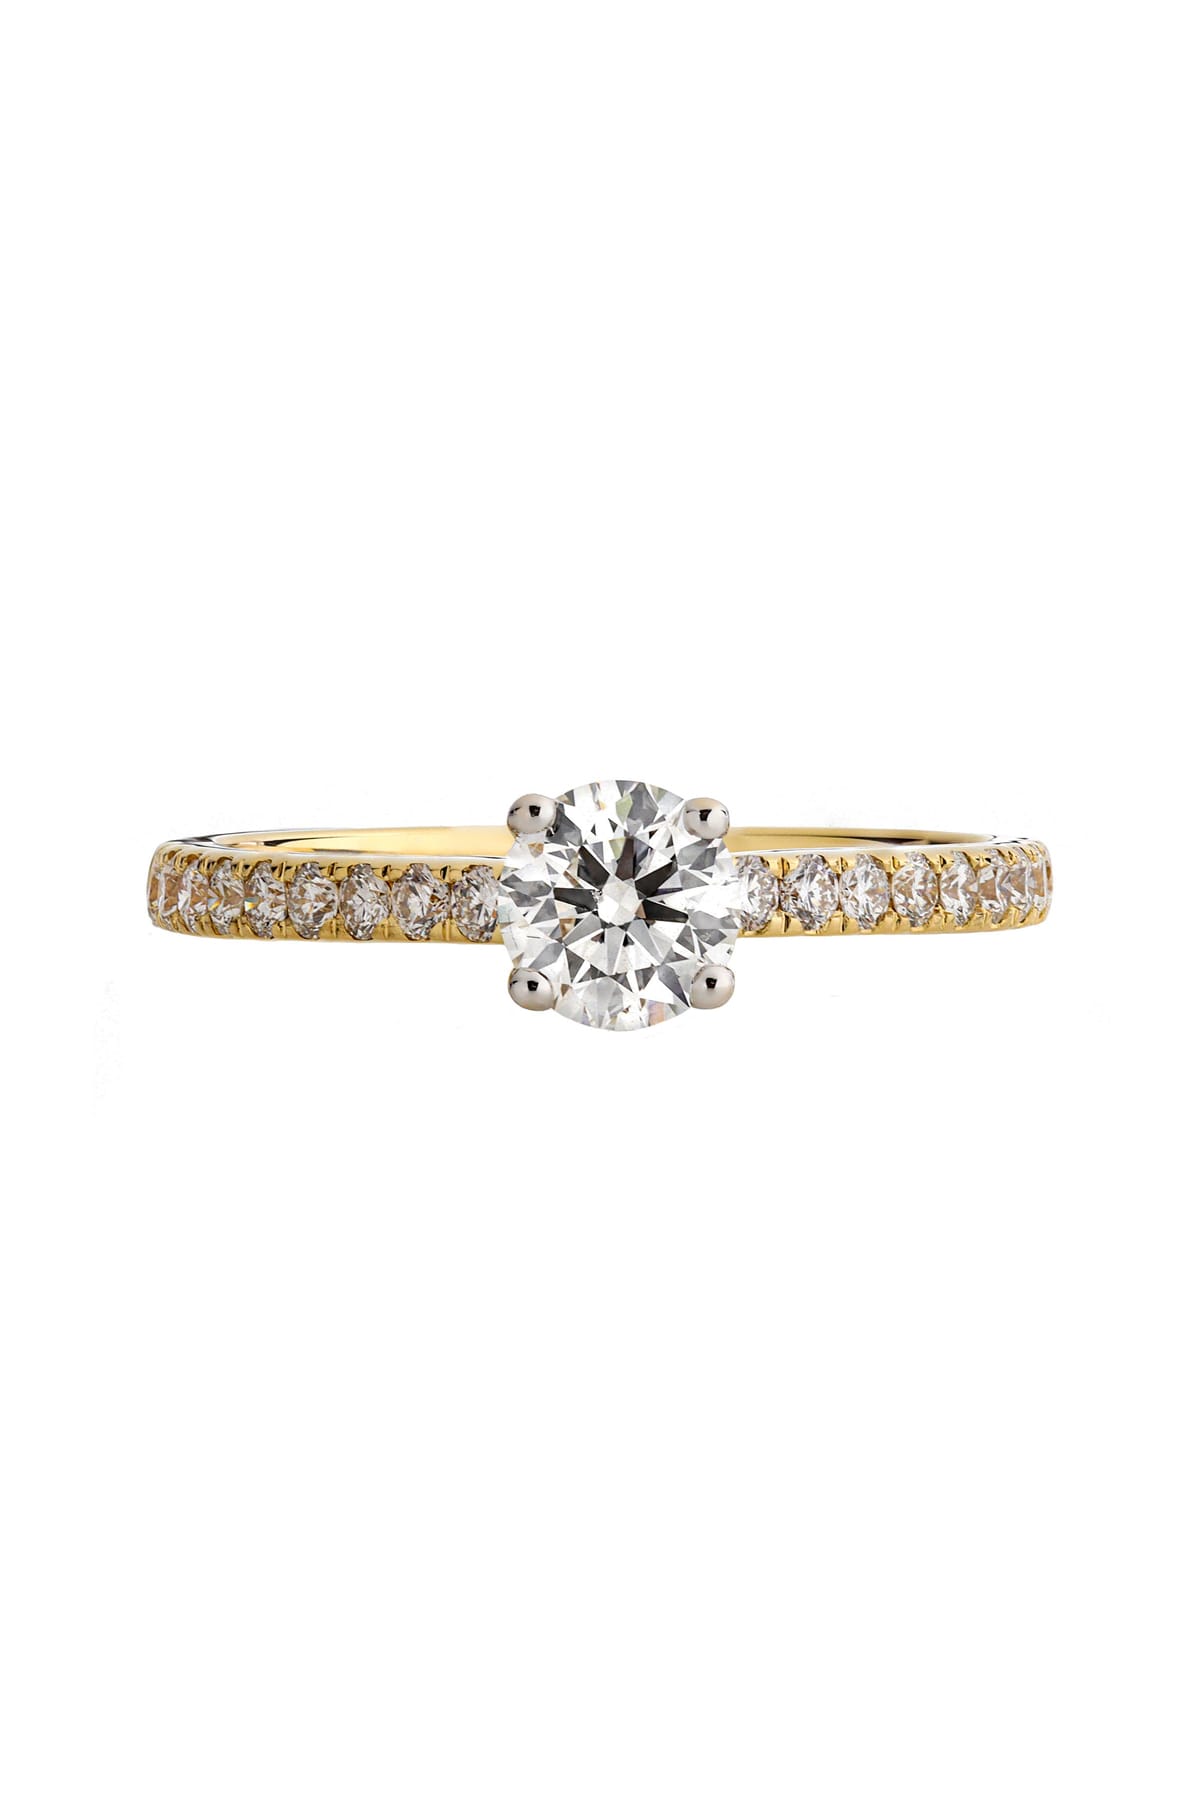 18ct Gold 0.51ct 4 Claw Round Diamond Engagement Ring with Diamond Band available at LeGassick Diamonds and Jewellery Gold Coast, Australia